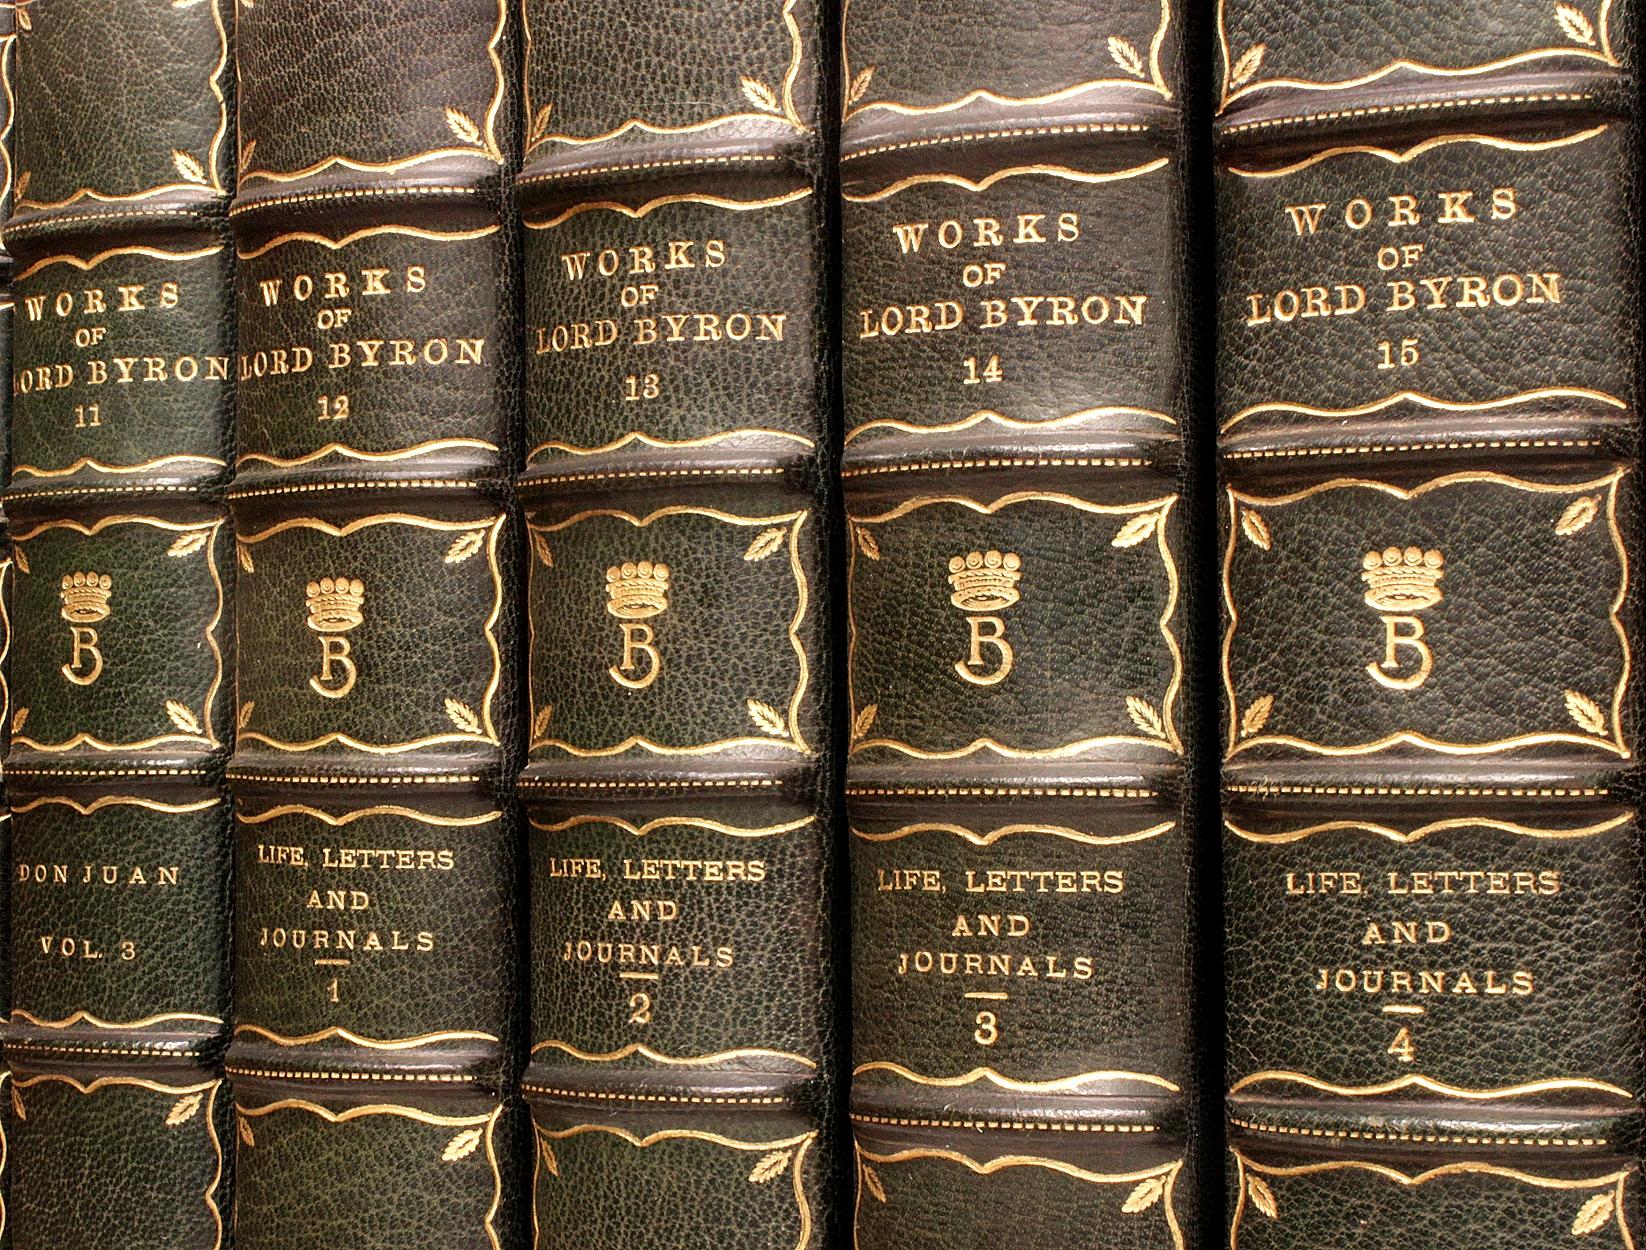 Early 20th Century Works of Lord Byron, Connoisseur Edition, 16 Vols., in a Fine Leather Binding